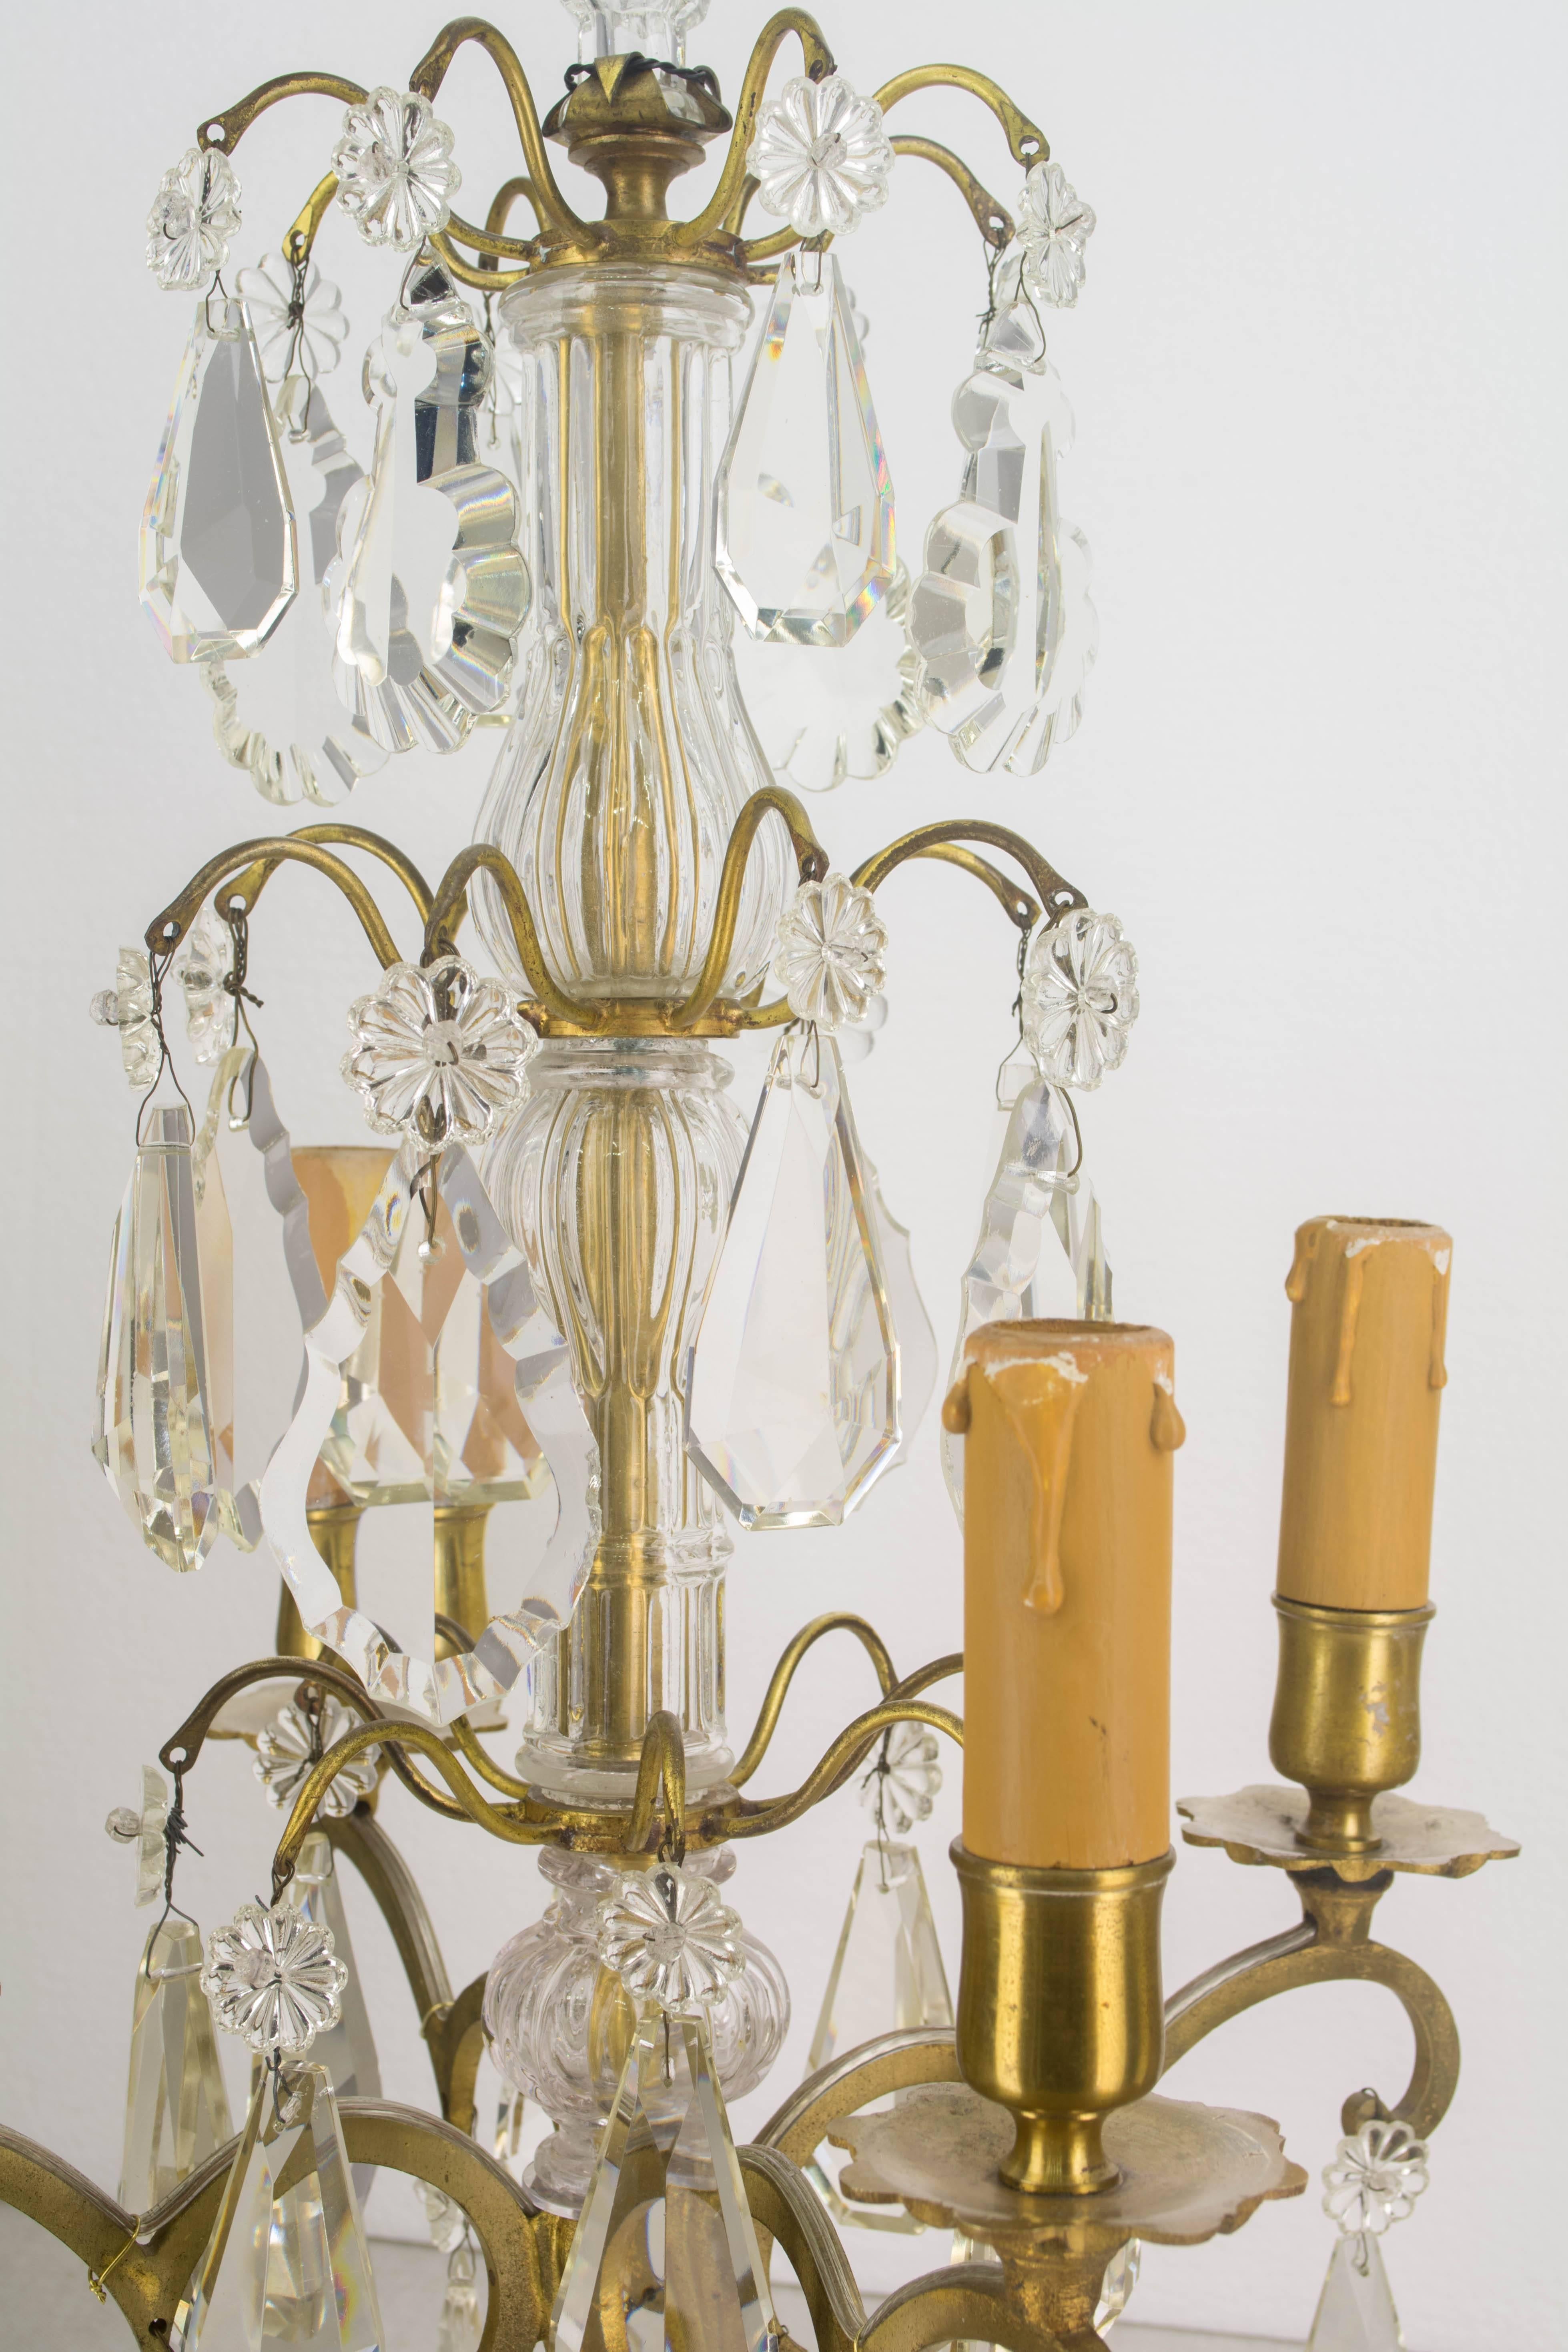 Pair of Louis XV style four-light French girandoles made of brass with three tiers of crystal prisms of various shapes and sizes, crystal columns and finials. Original candle covers. Tall, elegant proportions. Rewired and in working order. European